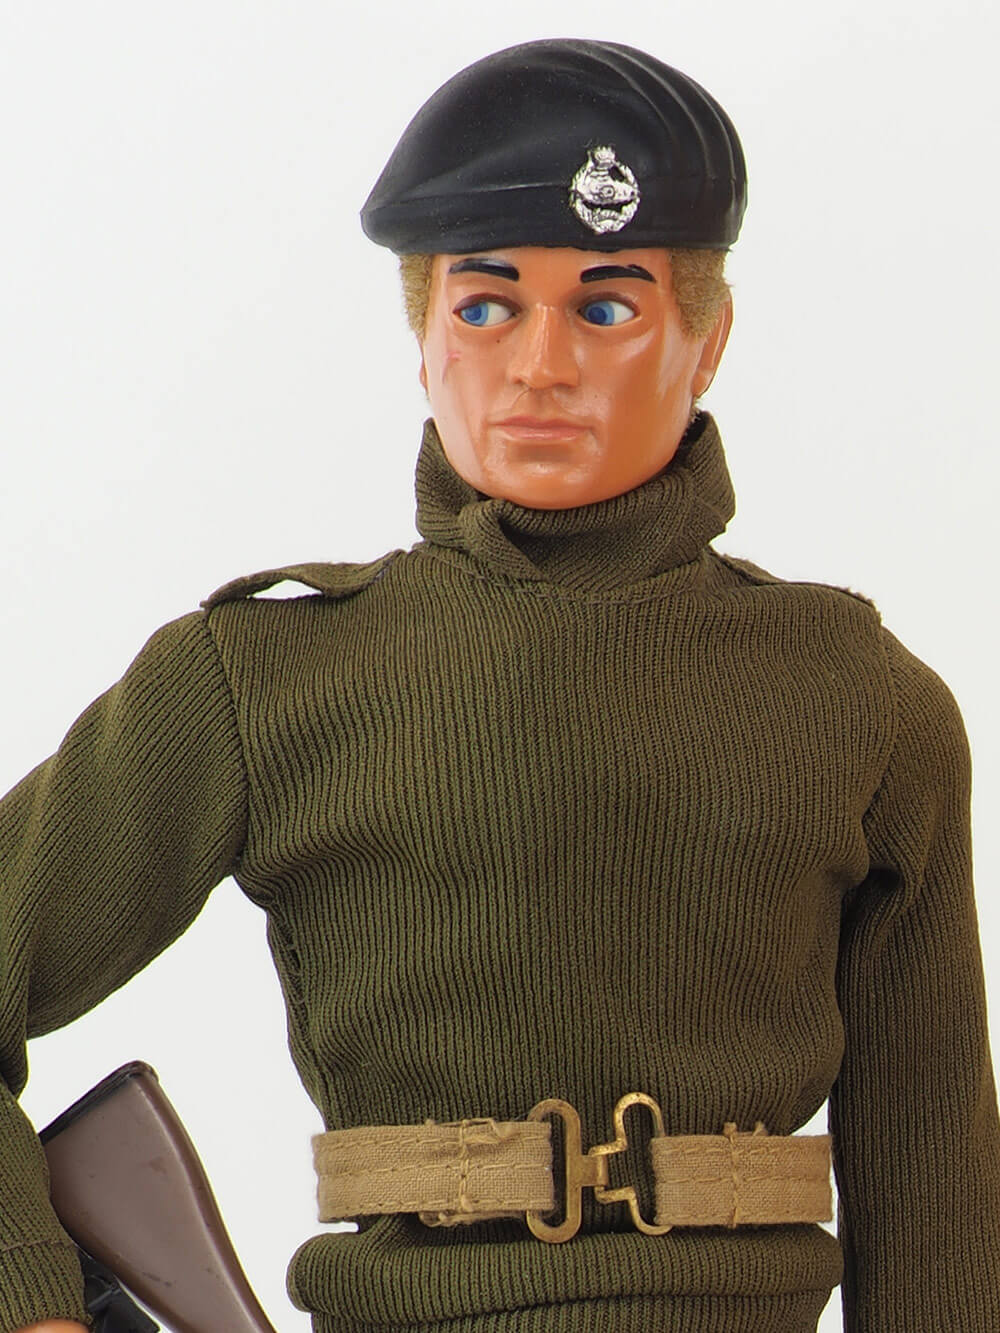 old action man